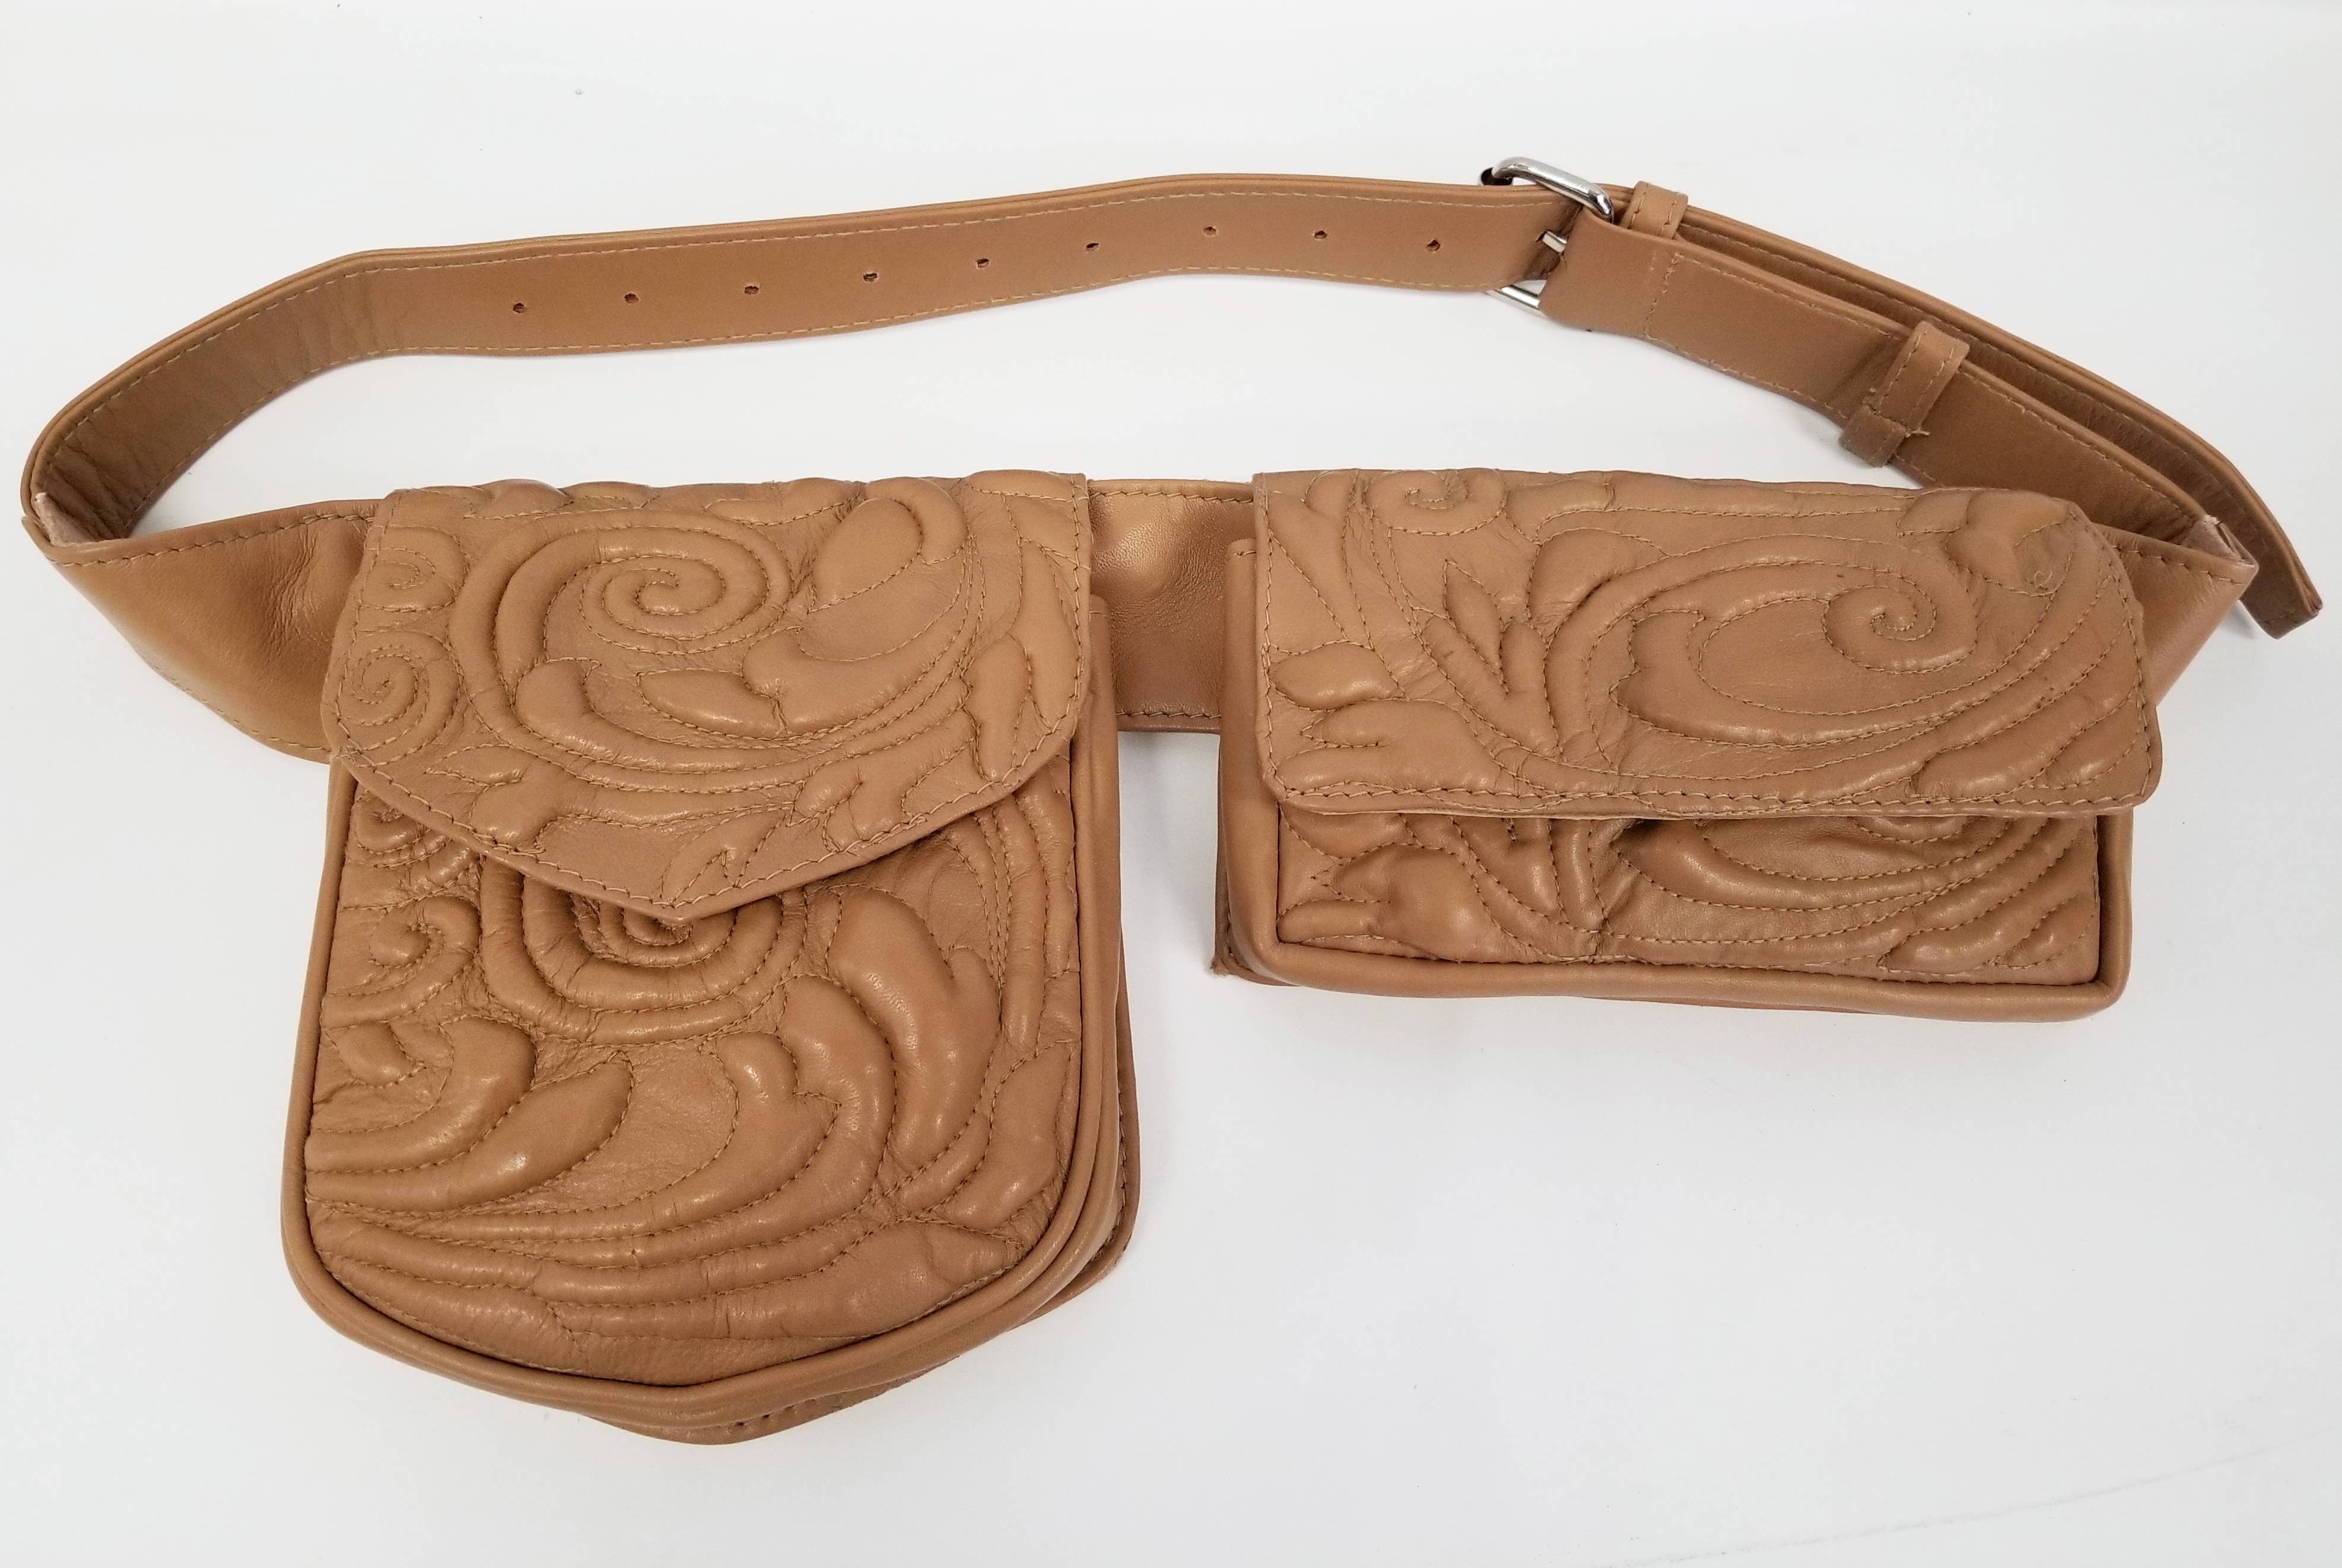 Late Medieval Leather Belt Pouch - Lord of Battles